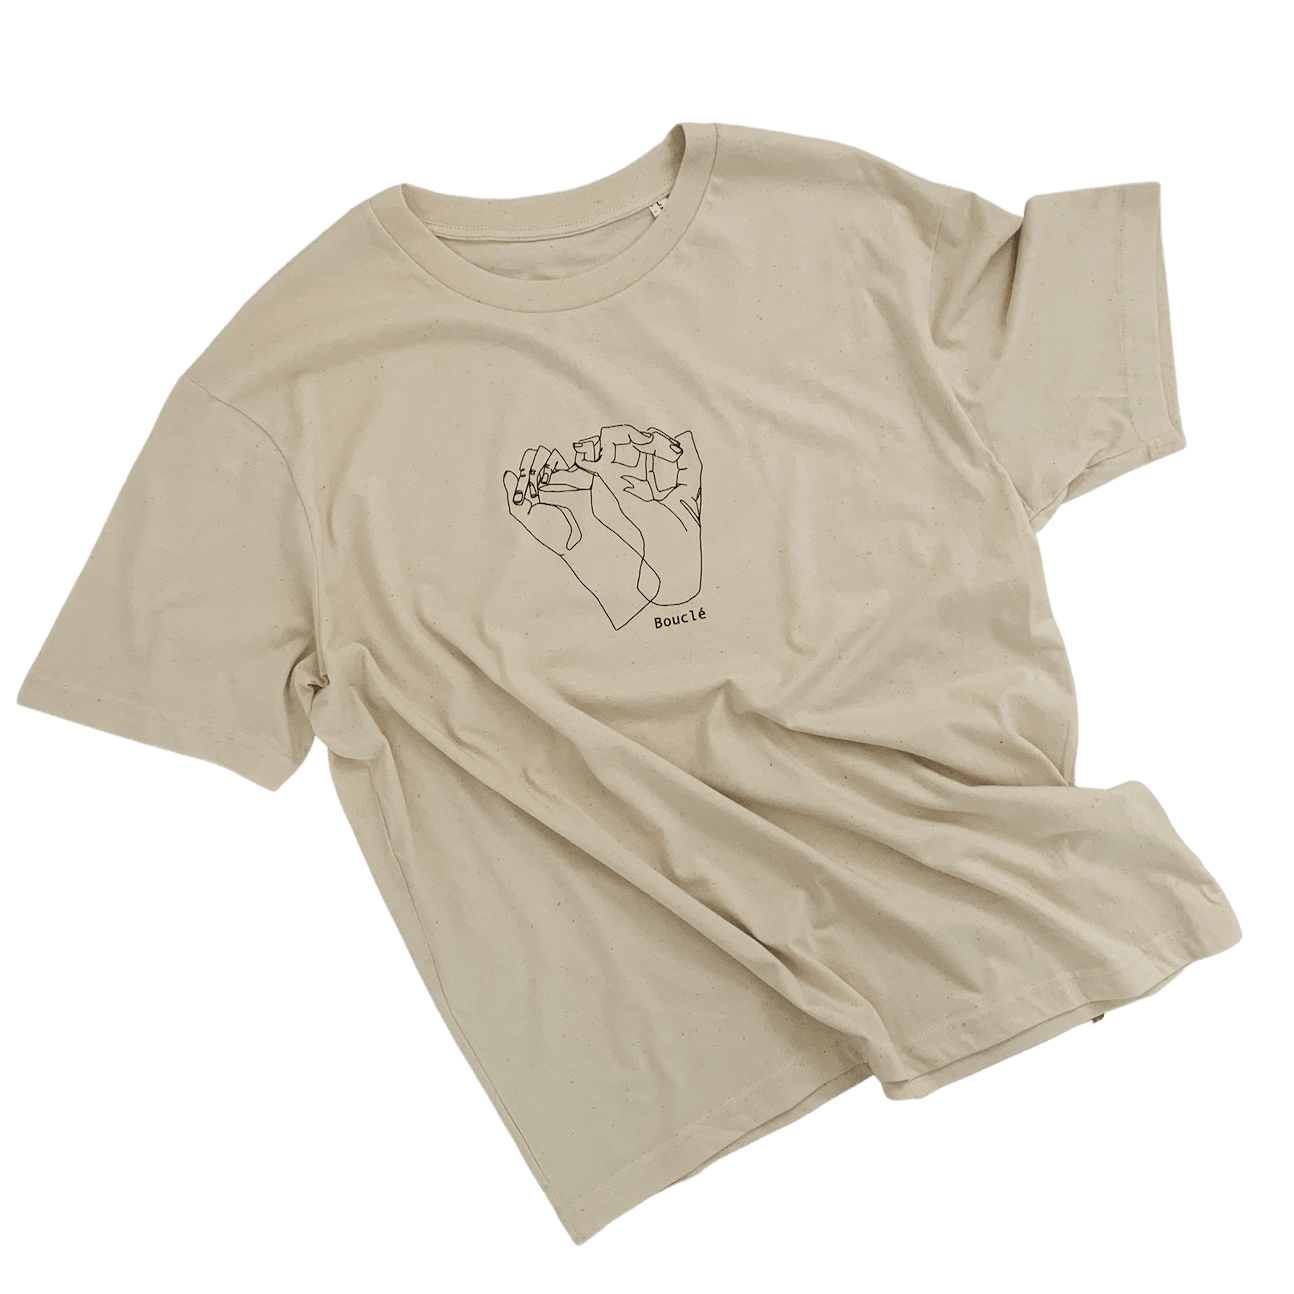 Organic cream cotton Bouclé London boxy fit short sleeve t-shirt. Made from unbleached ecru organic cotton & screen printed with an illustration in the UK